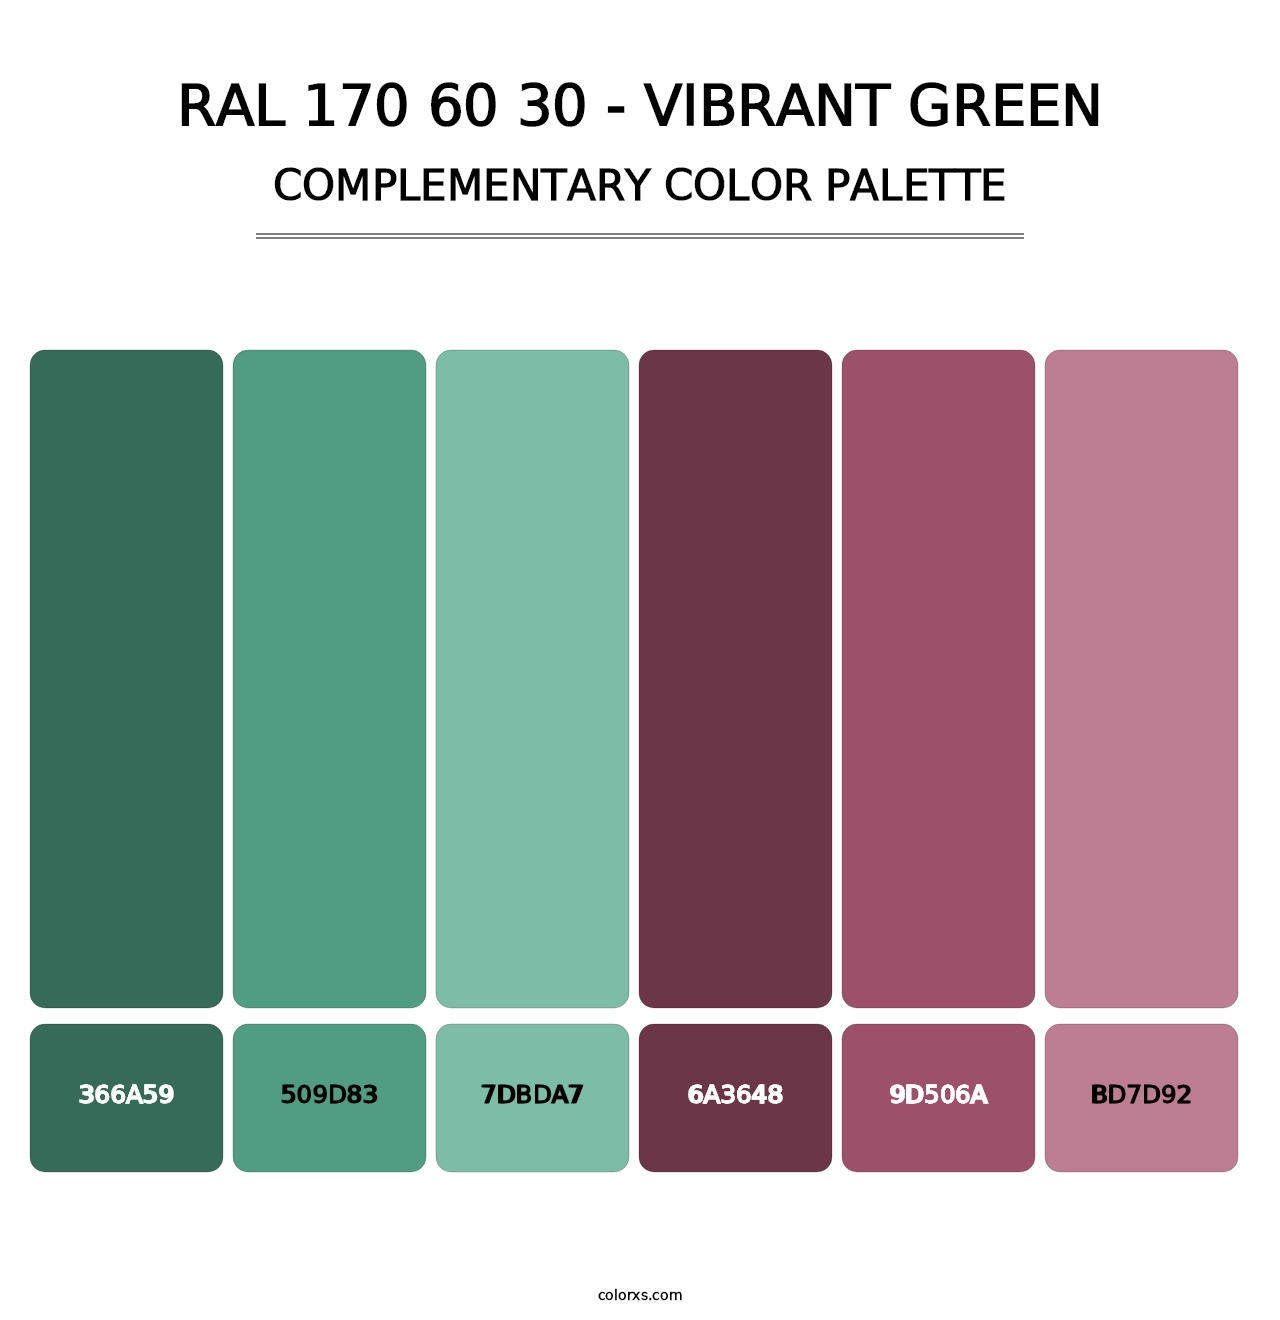 RAL 170 60 30 - Vibrant Green - Complementary Color Palette